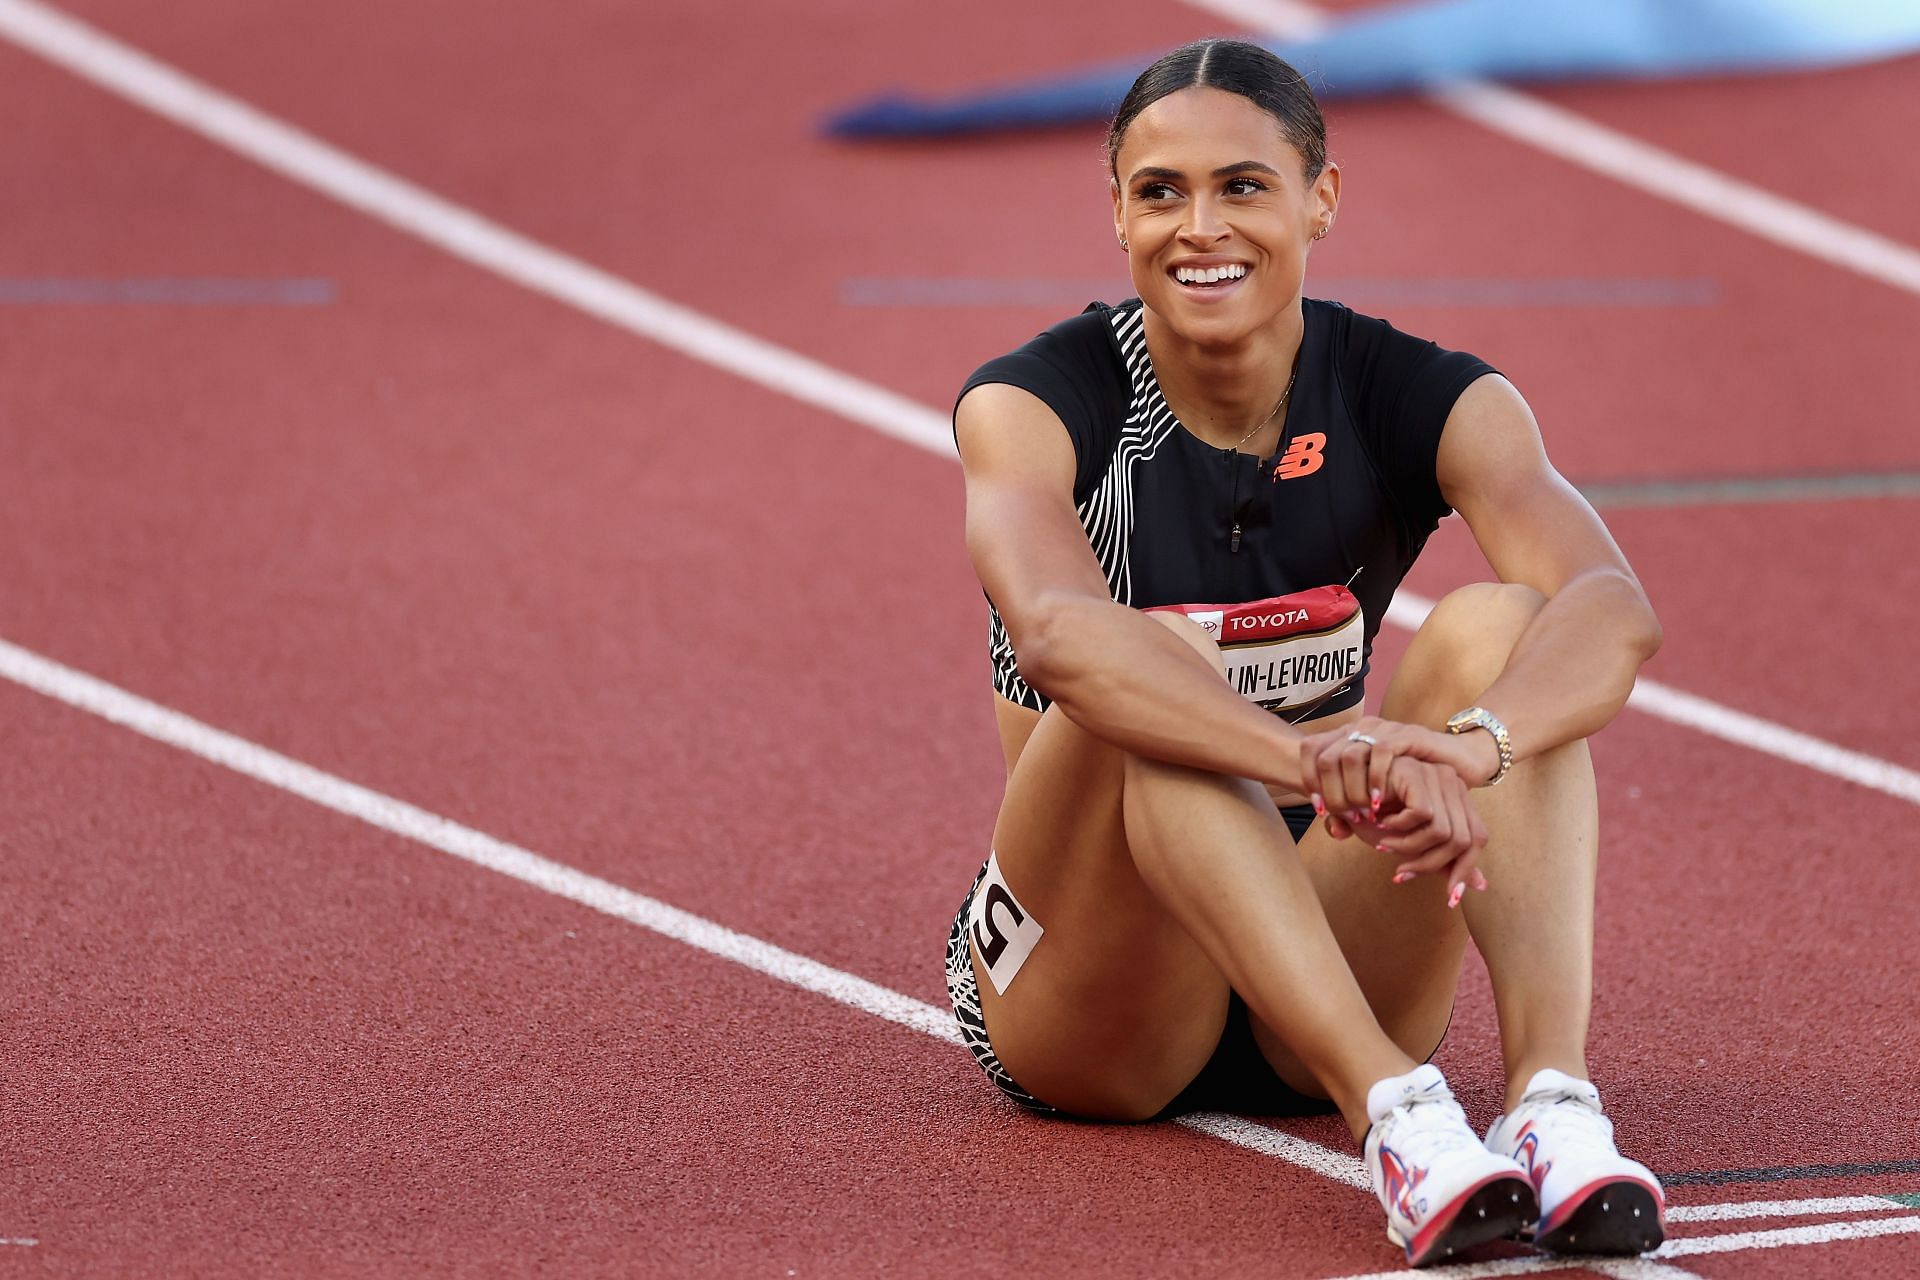 Sydney McLaughlin-Levrone reacts after winning the Women&#039;s 400m Final during the 2023 USATF Outdoor Championships in Eugene, Oregon